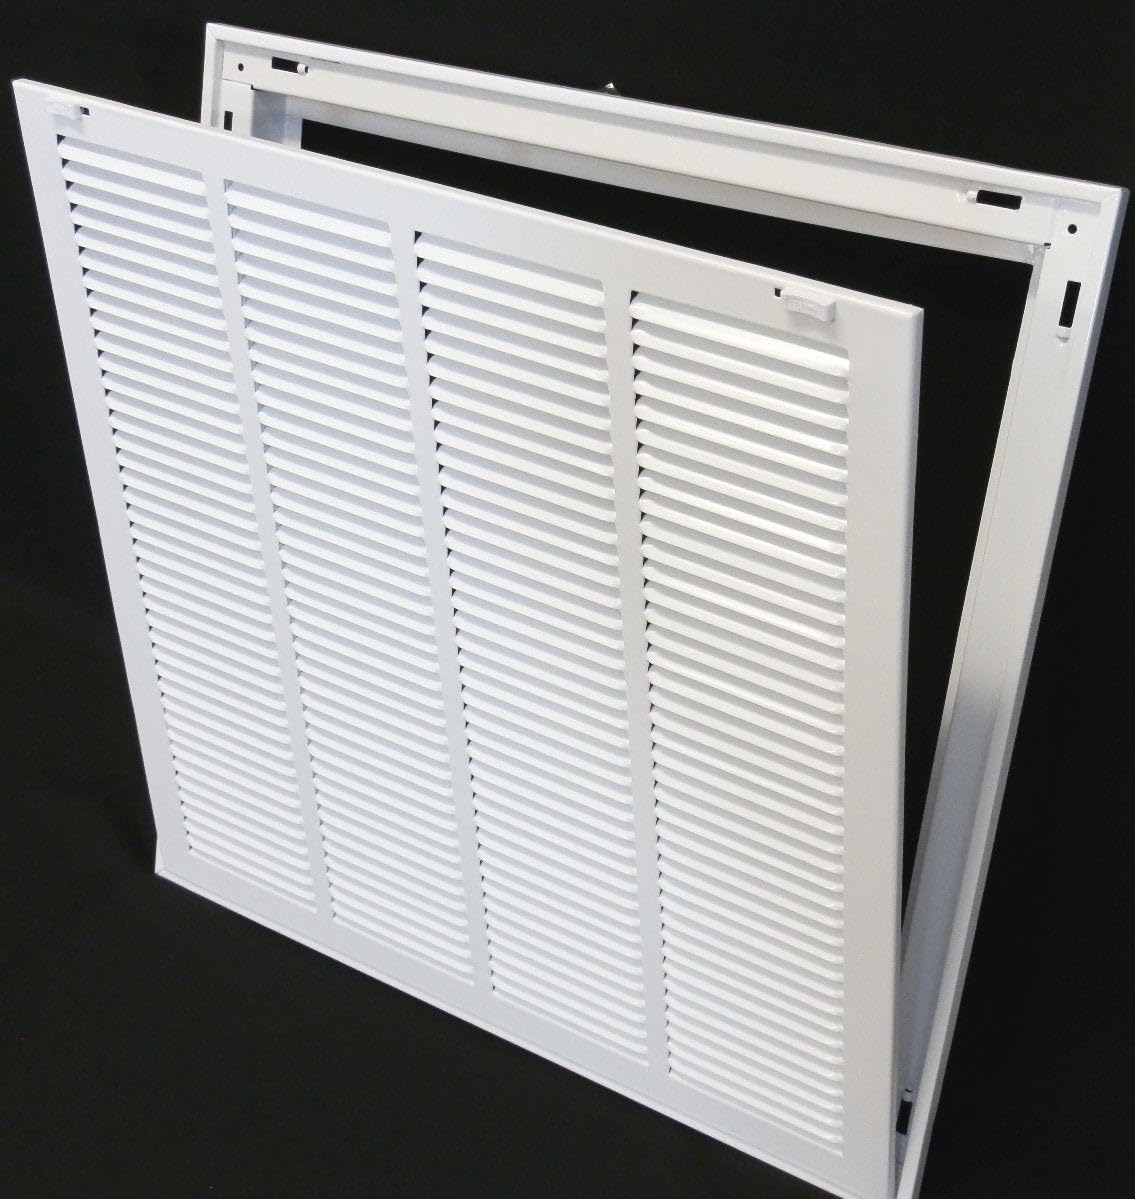 10&quot; X 20&quot; Steel Return Air Filter Grille for 1&quot; Filter - Removable Frame - [Outer Dimensions: 12 5/8&quot; X 22 5/8&quot;]